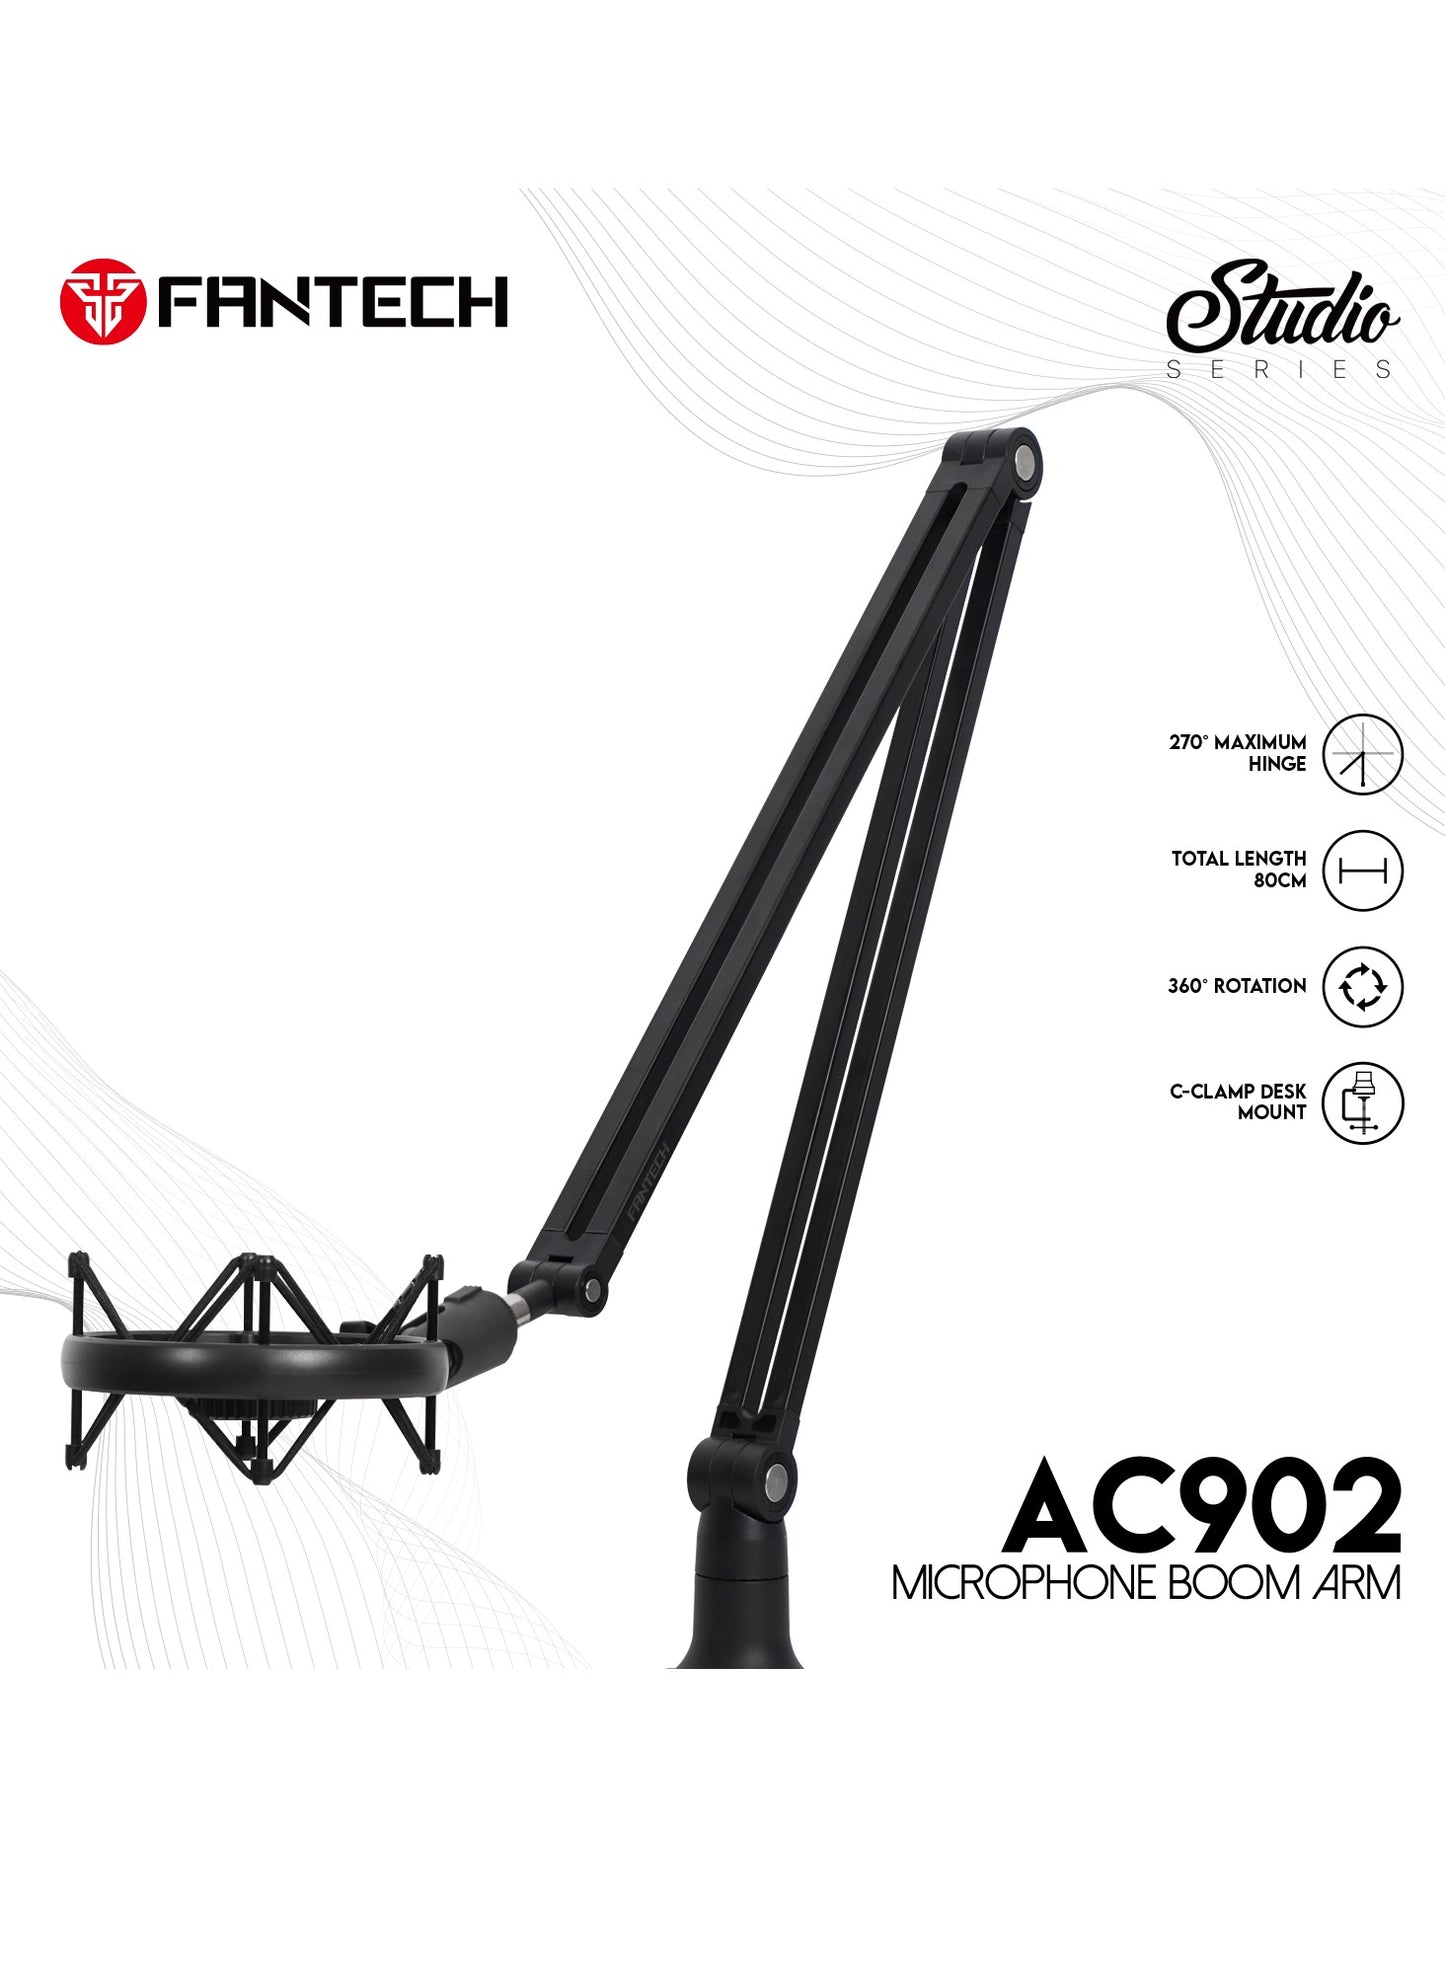 FANTECH AC902 Microphone Boom Arm Withstand up to 1 Kg weight